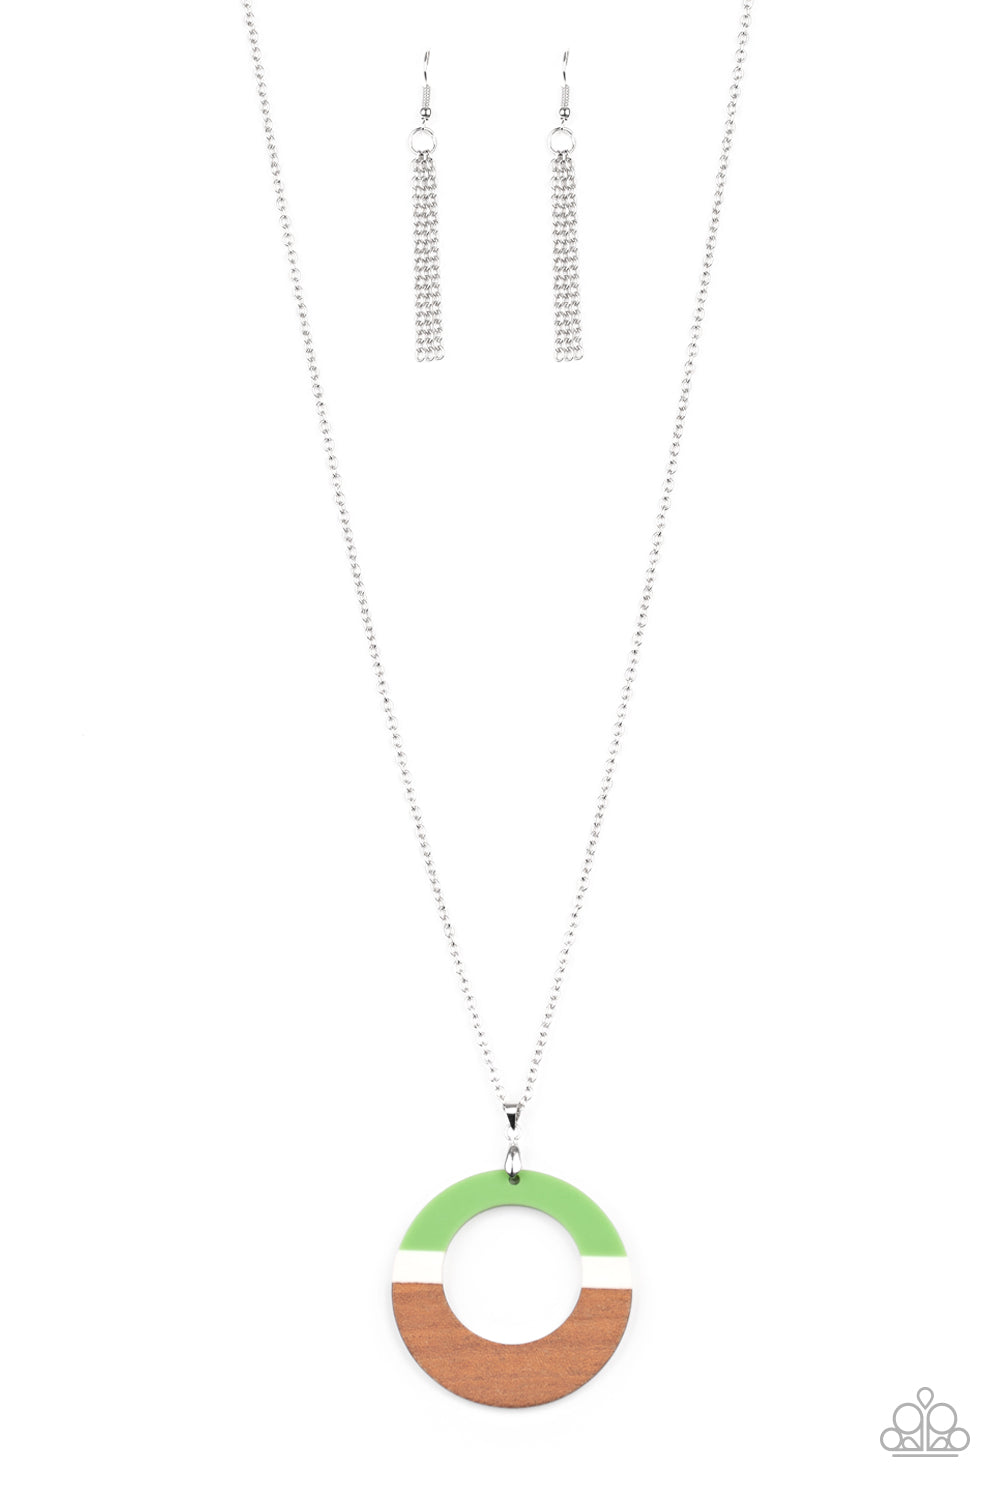 five-dollar-jewelry-sail-into-the-sunset-green-necklace-paparazzi-accessories